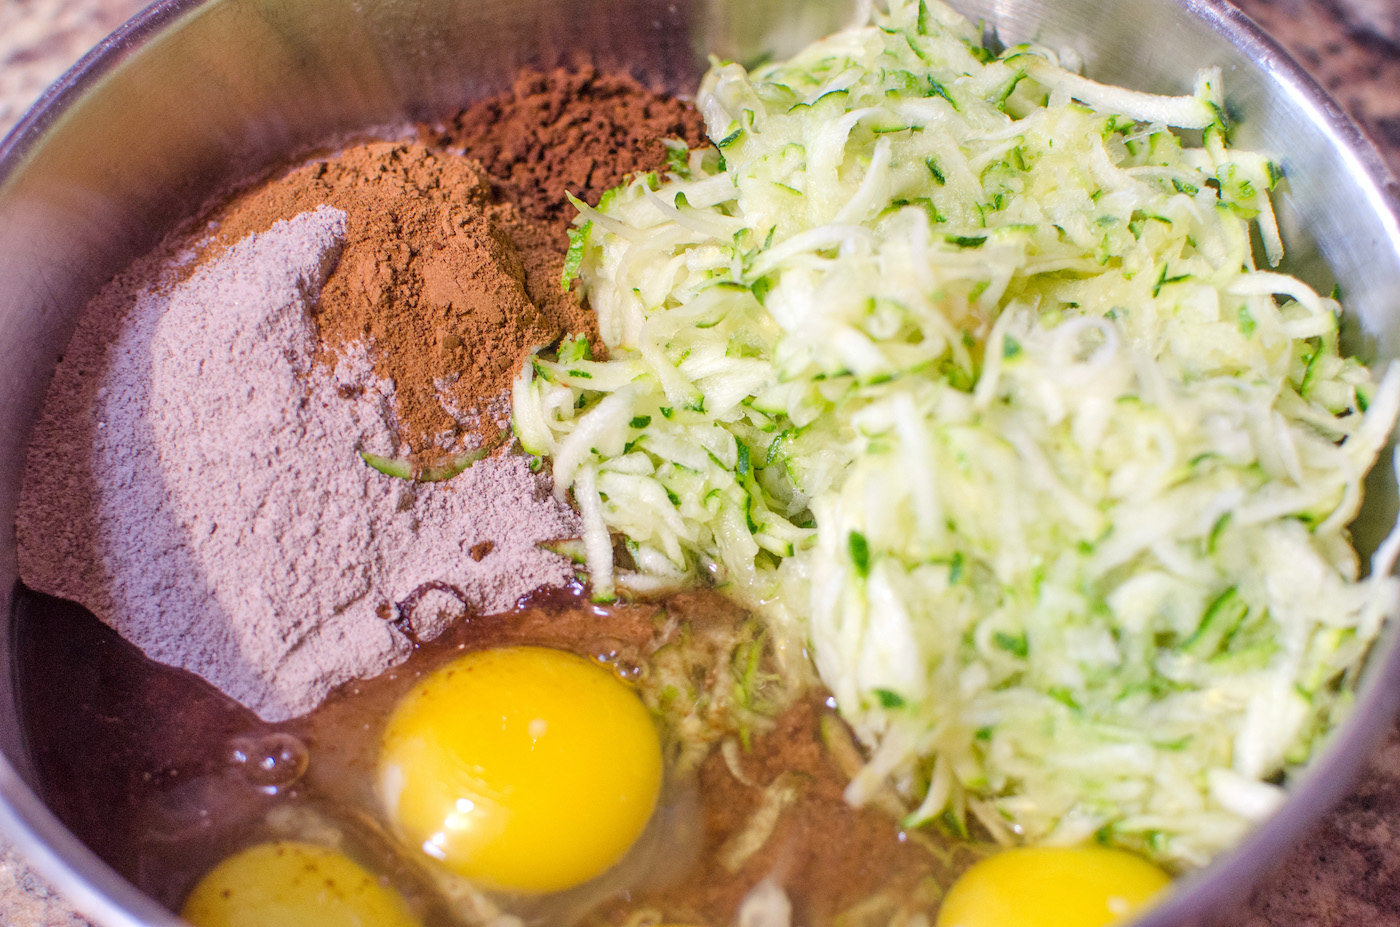 Cake mix, pudding, zucchini, and eggs in a metal bowl